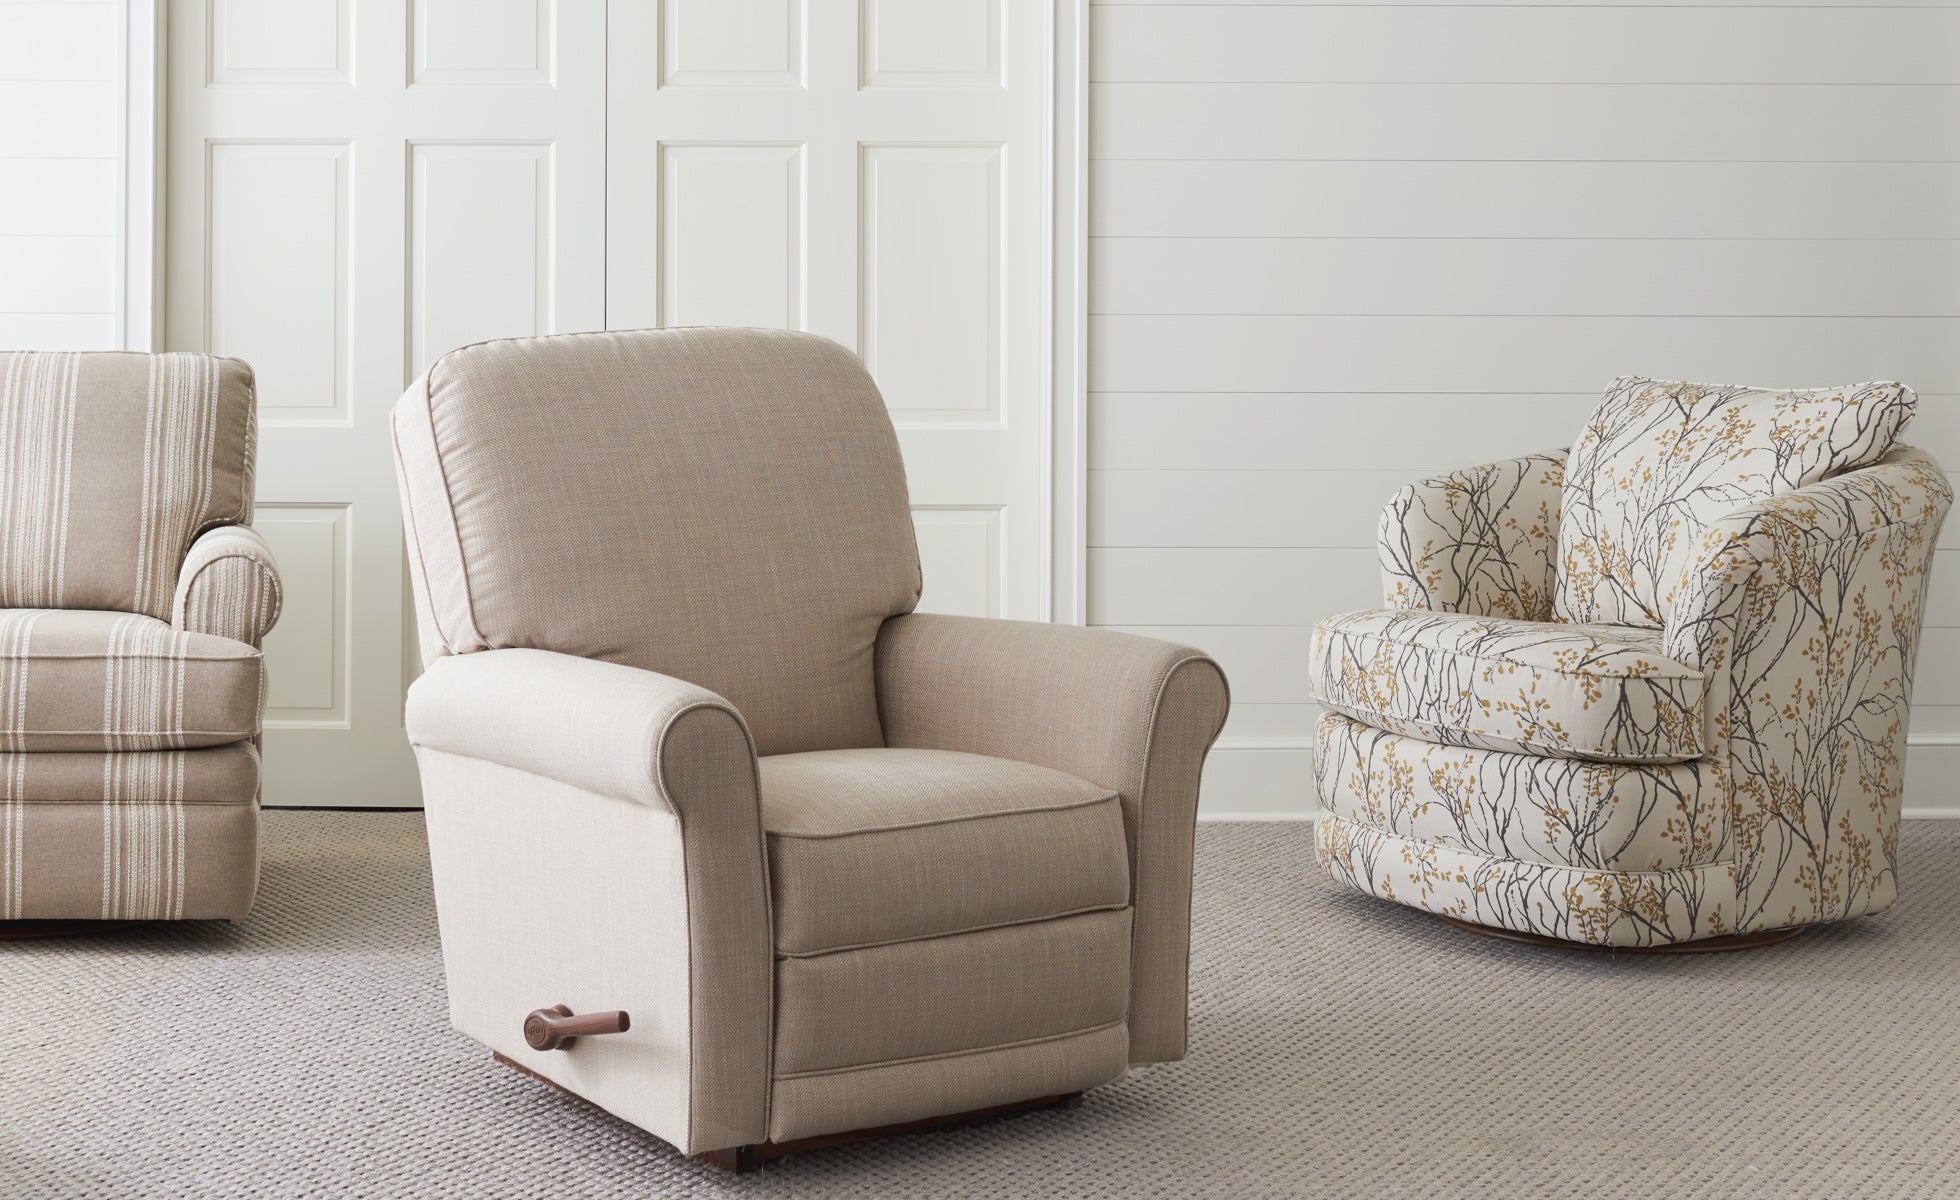 Nursery Furniture La Z Boy, Leather Recliners For Small Spaces